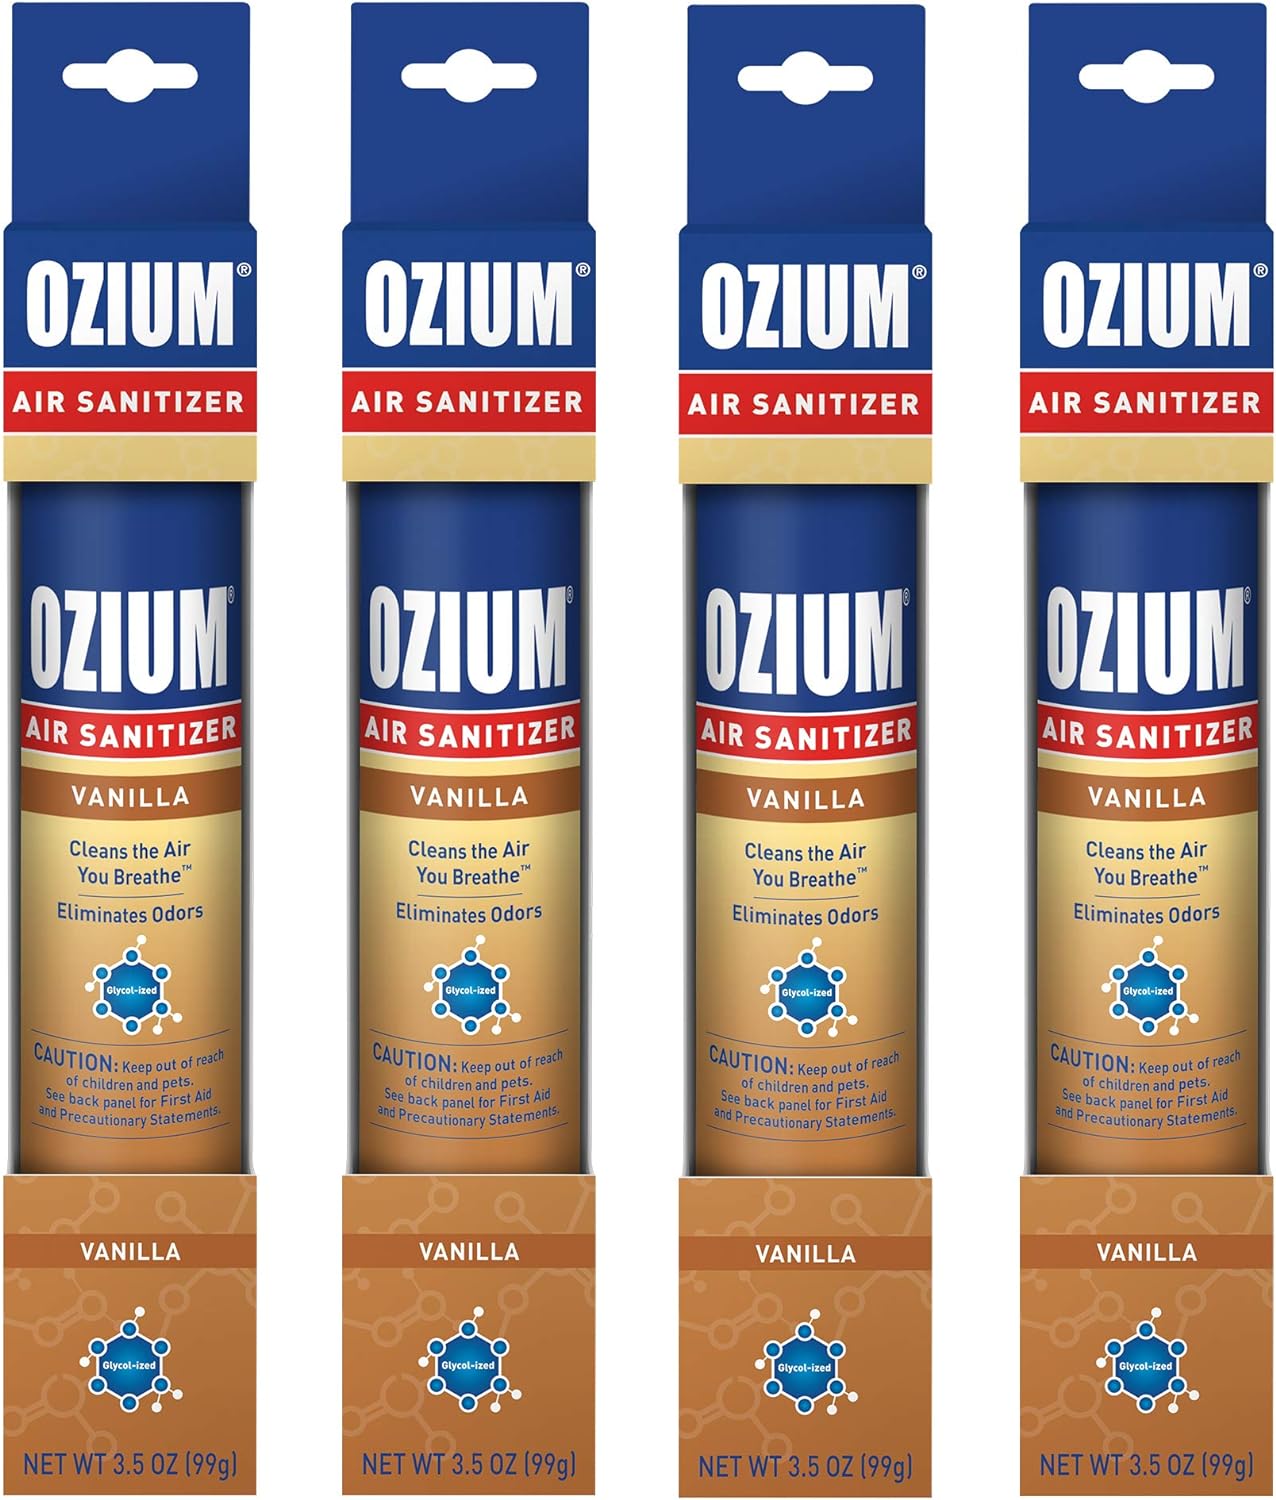 Ozium 3.5 Oz. Air Sanitizer & Odor Eliminator for Homes, Cars, Offices and More, Vanilla Scent, 4 Pack